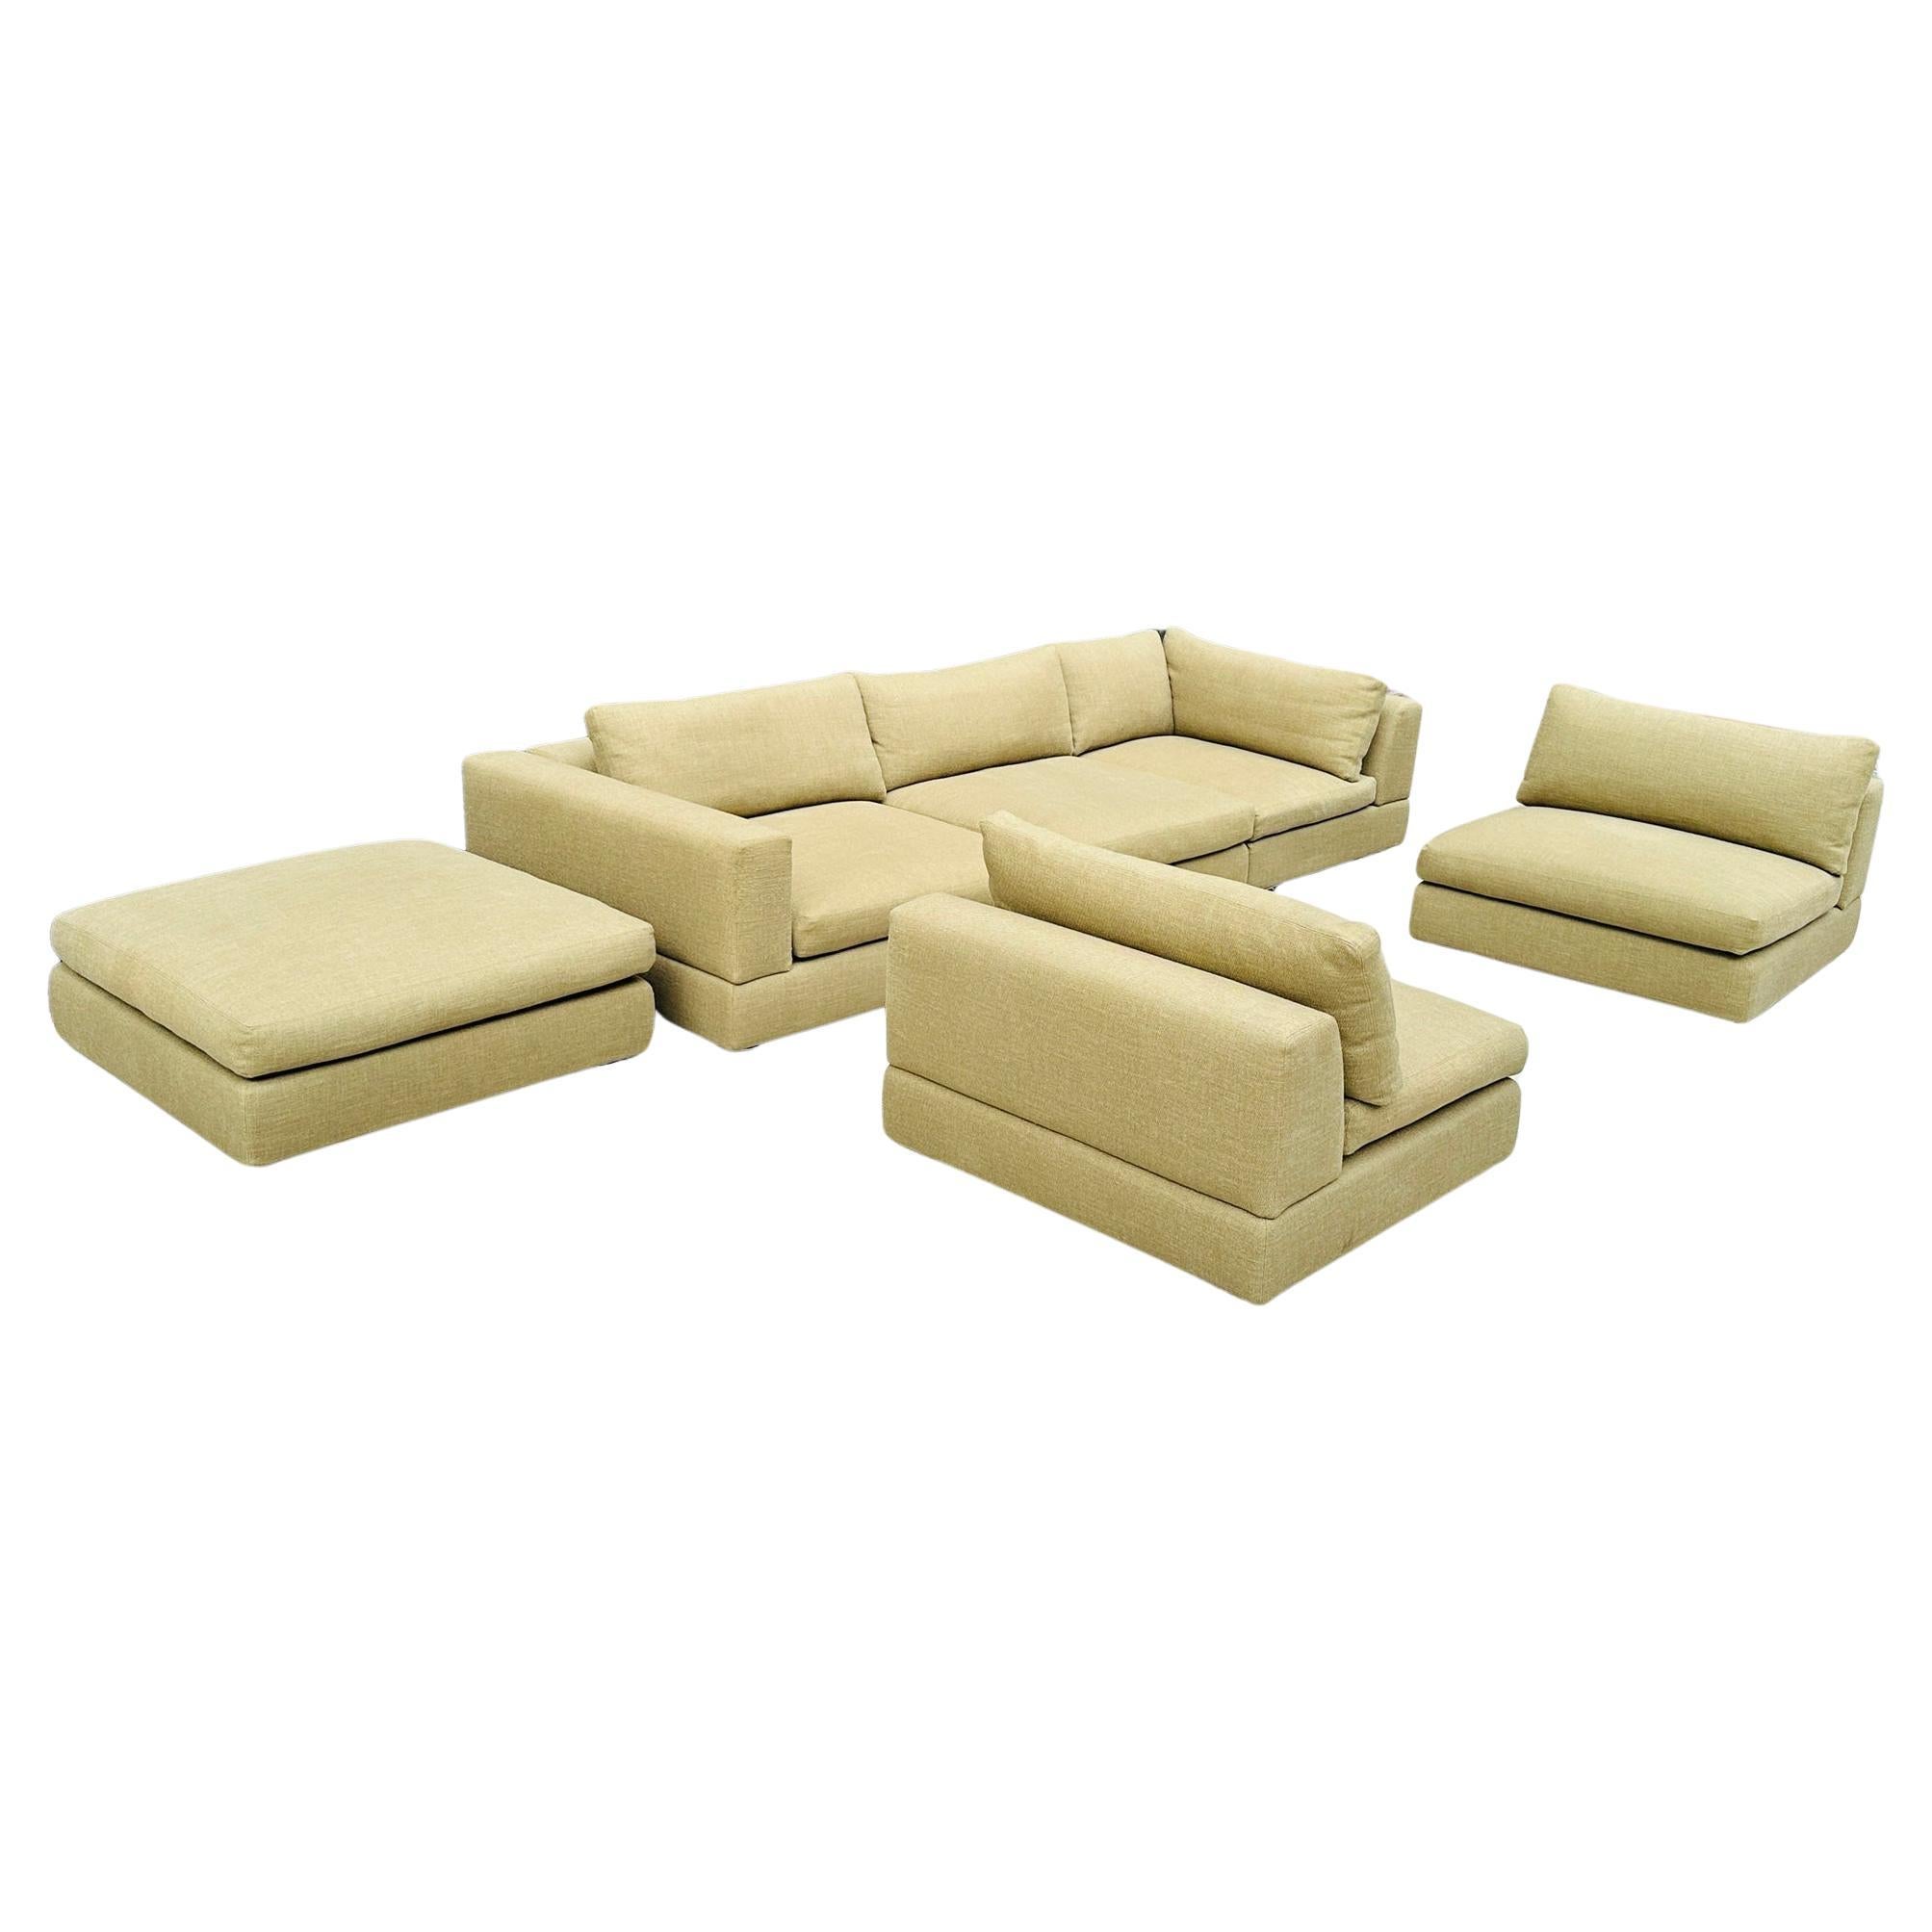 6 Piece Sectional Made in Italy by Rodolfo Dordoni for Minotti, Italy 2006 For Sale